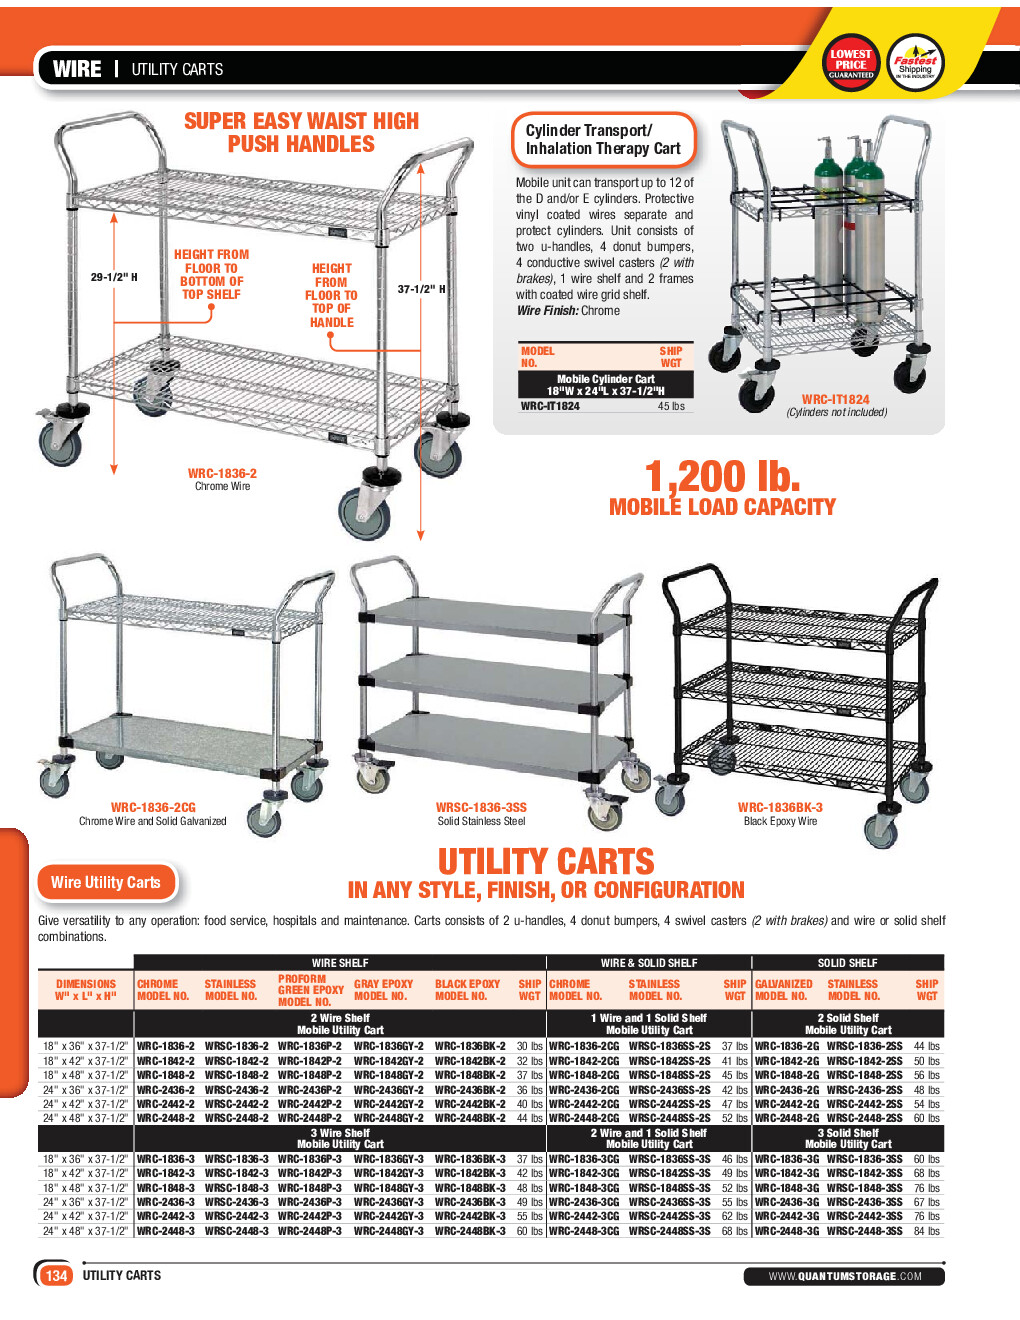 Quantum WRSC-1836-3 Metal Wire Bussing Utility Transport Cart